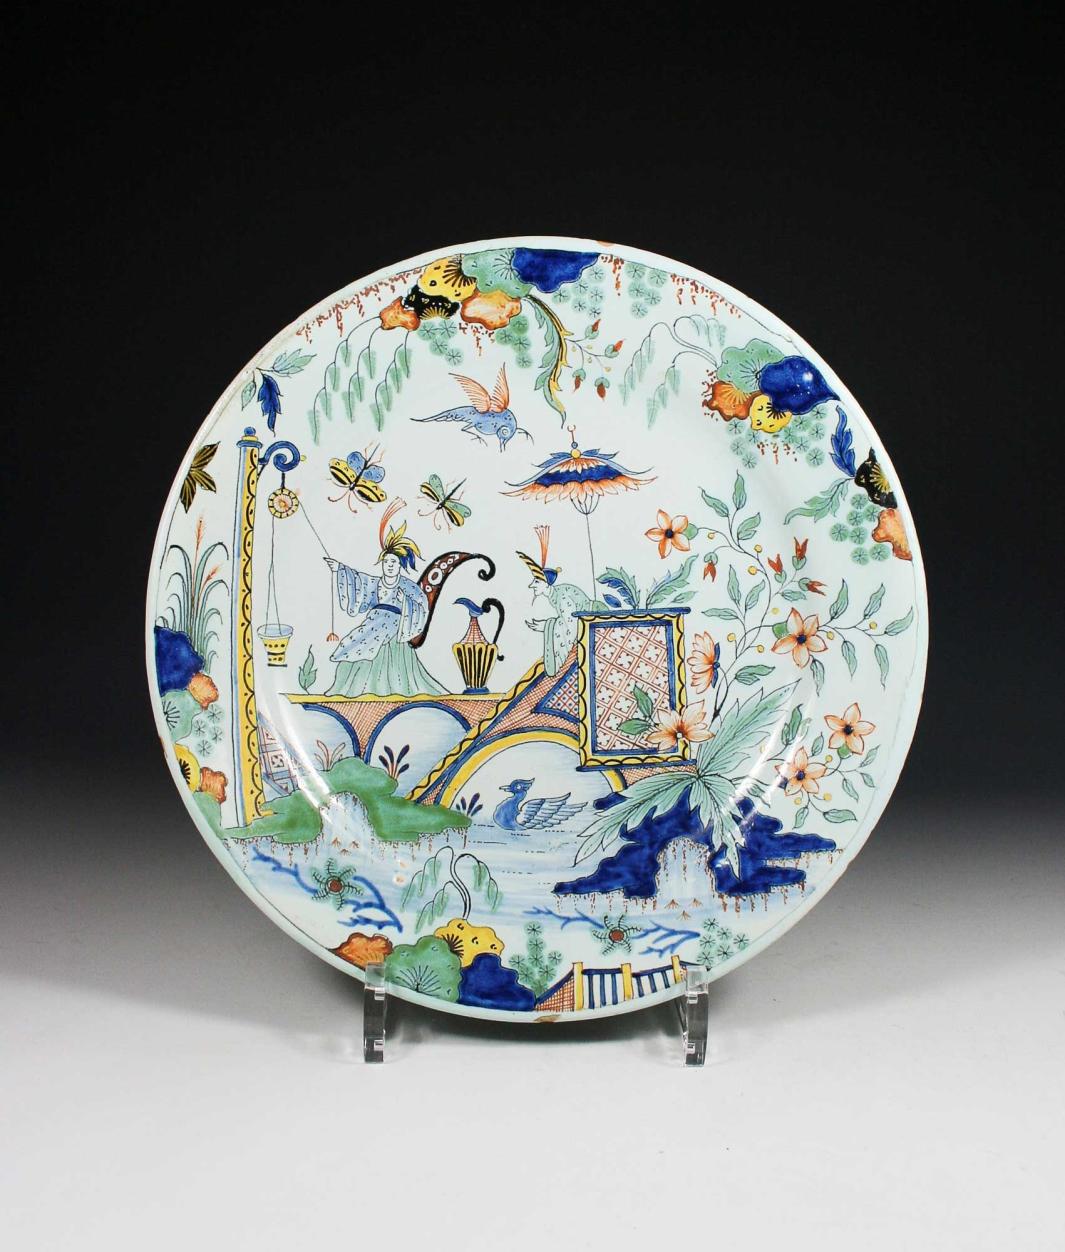 Earthenware plate with a landscape scene of a figure sitting on a bridge using a pulley system to pull a bucket of water from the stream below and another figure watching.